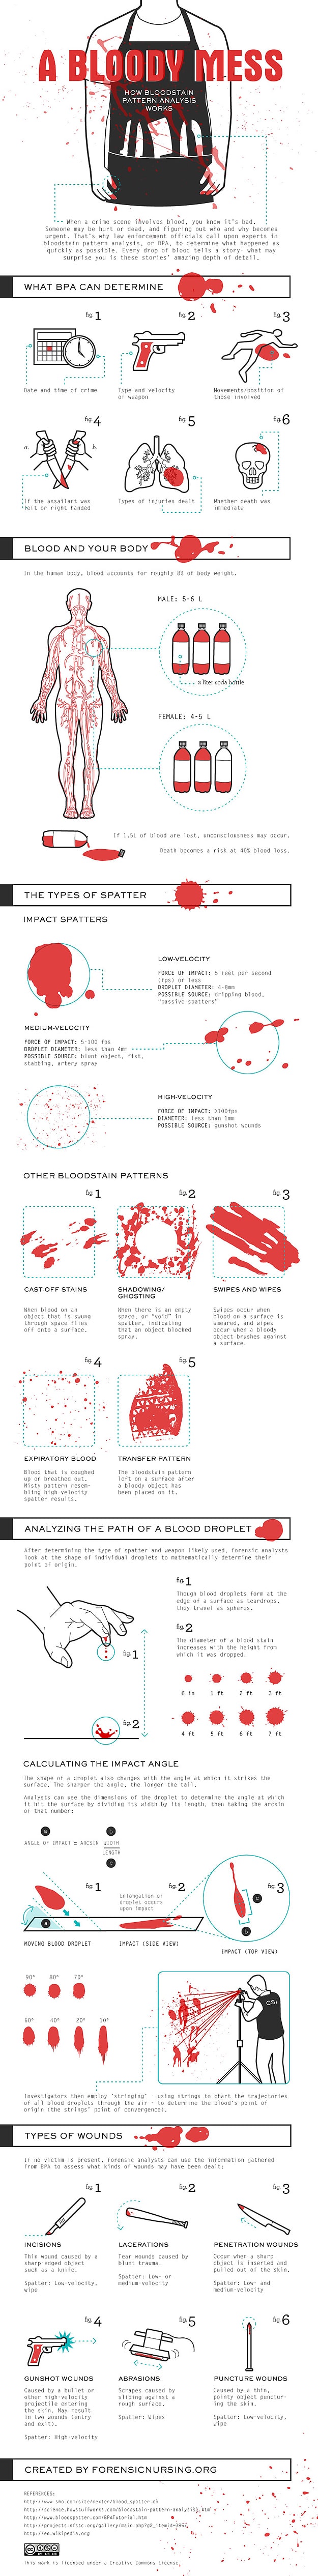 CSI Wannabes: How To Analyze A Bloodstain Pattern